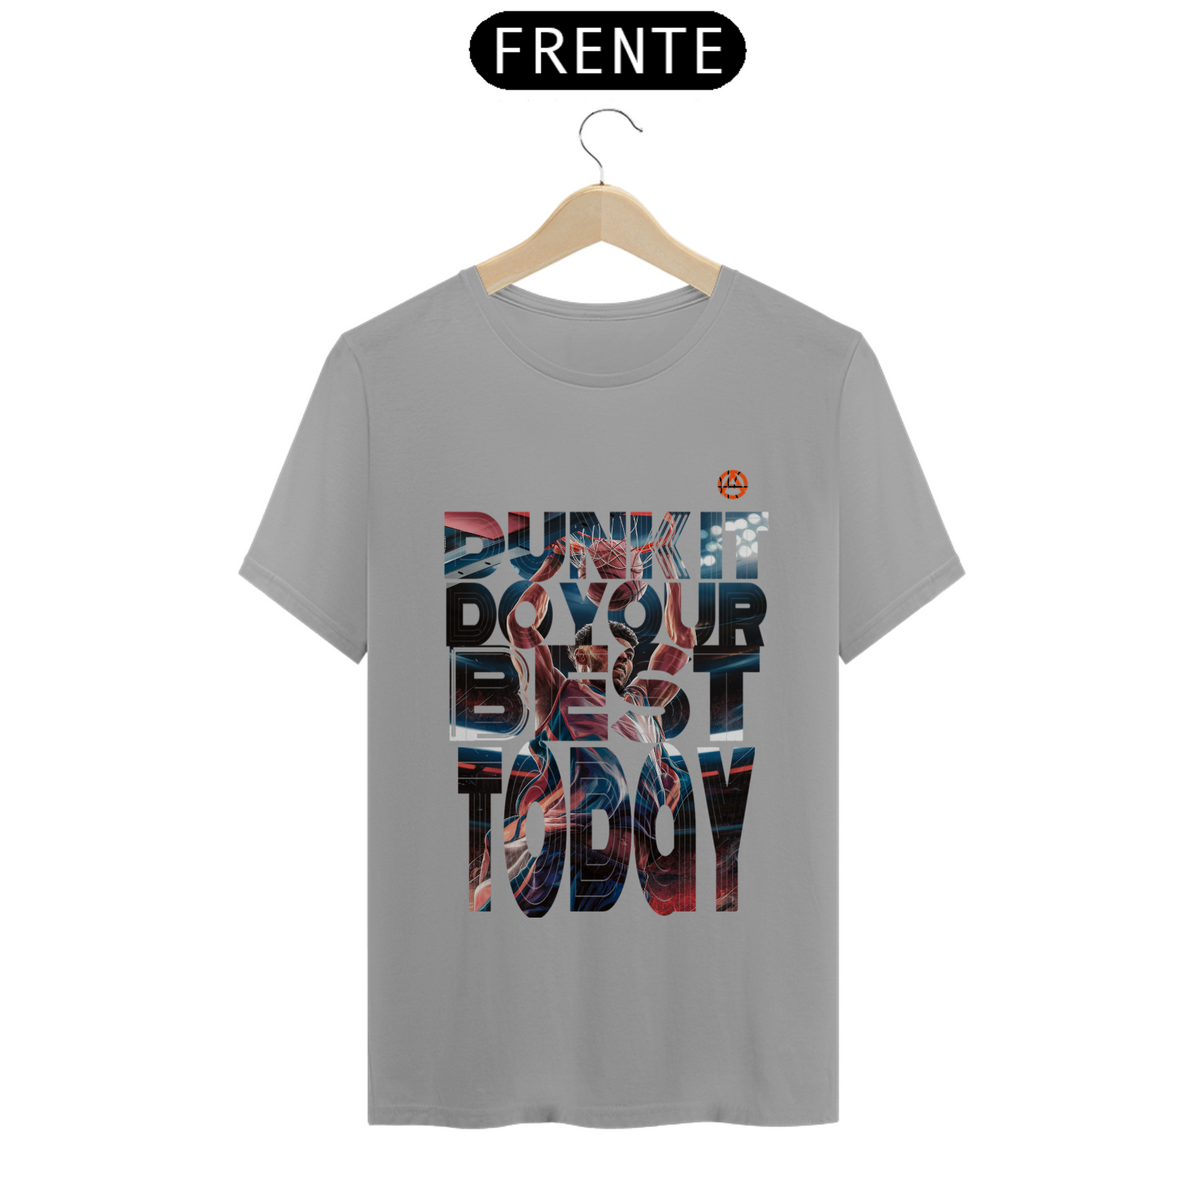 Nome do produto: Dunk It, Do Your Best Today - T-Shirt Quality